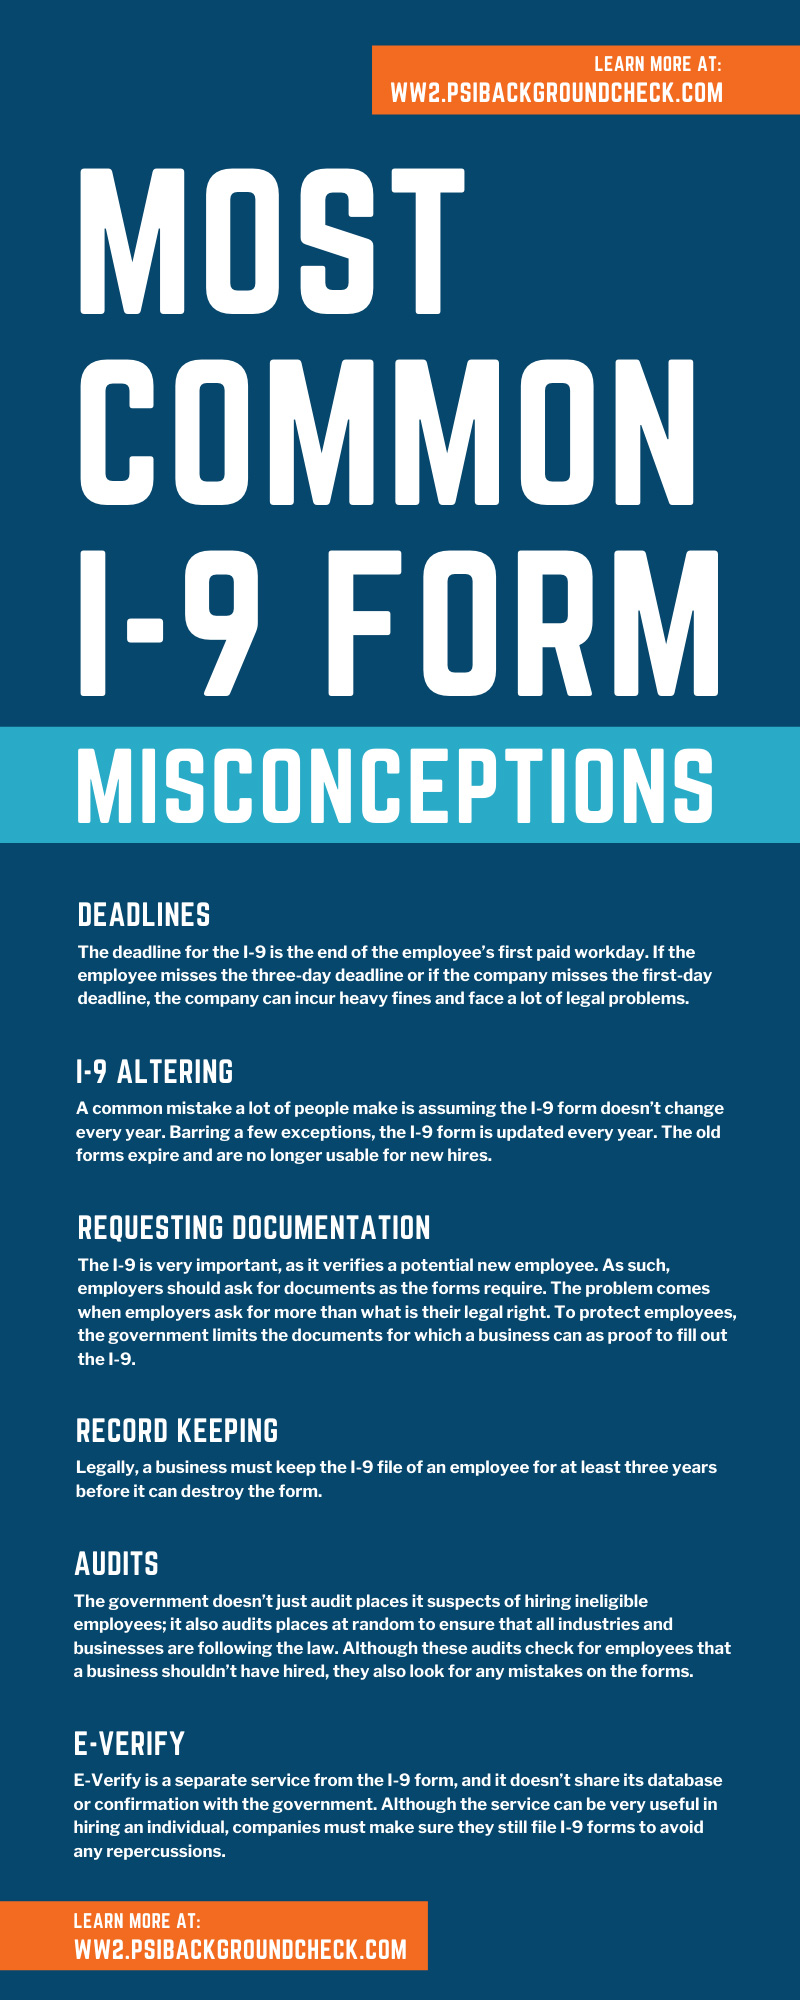 Most Common I-9 Form Misconceptions